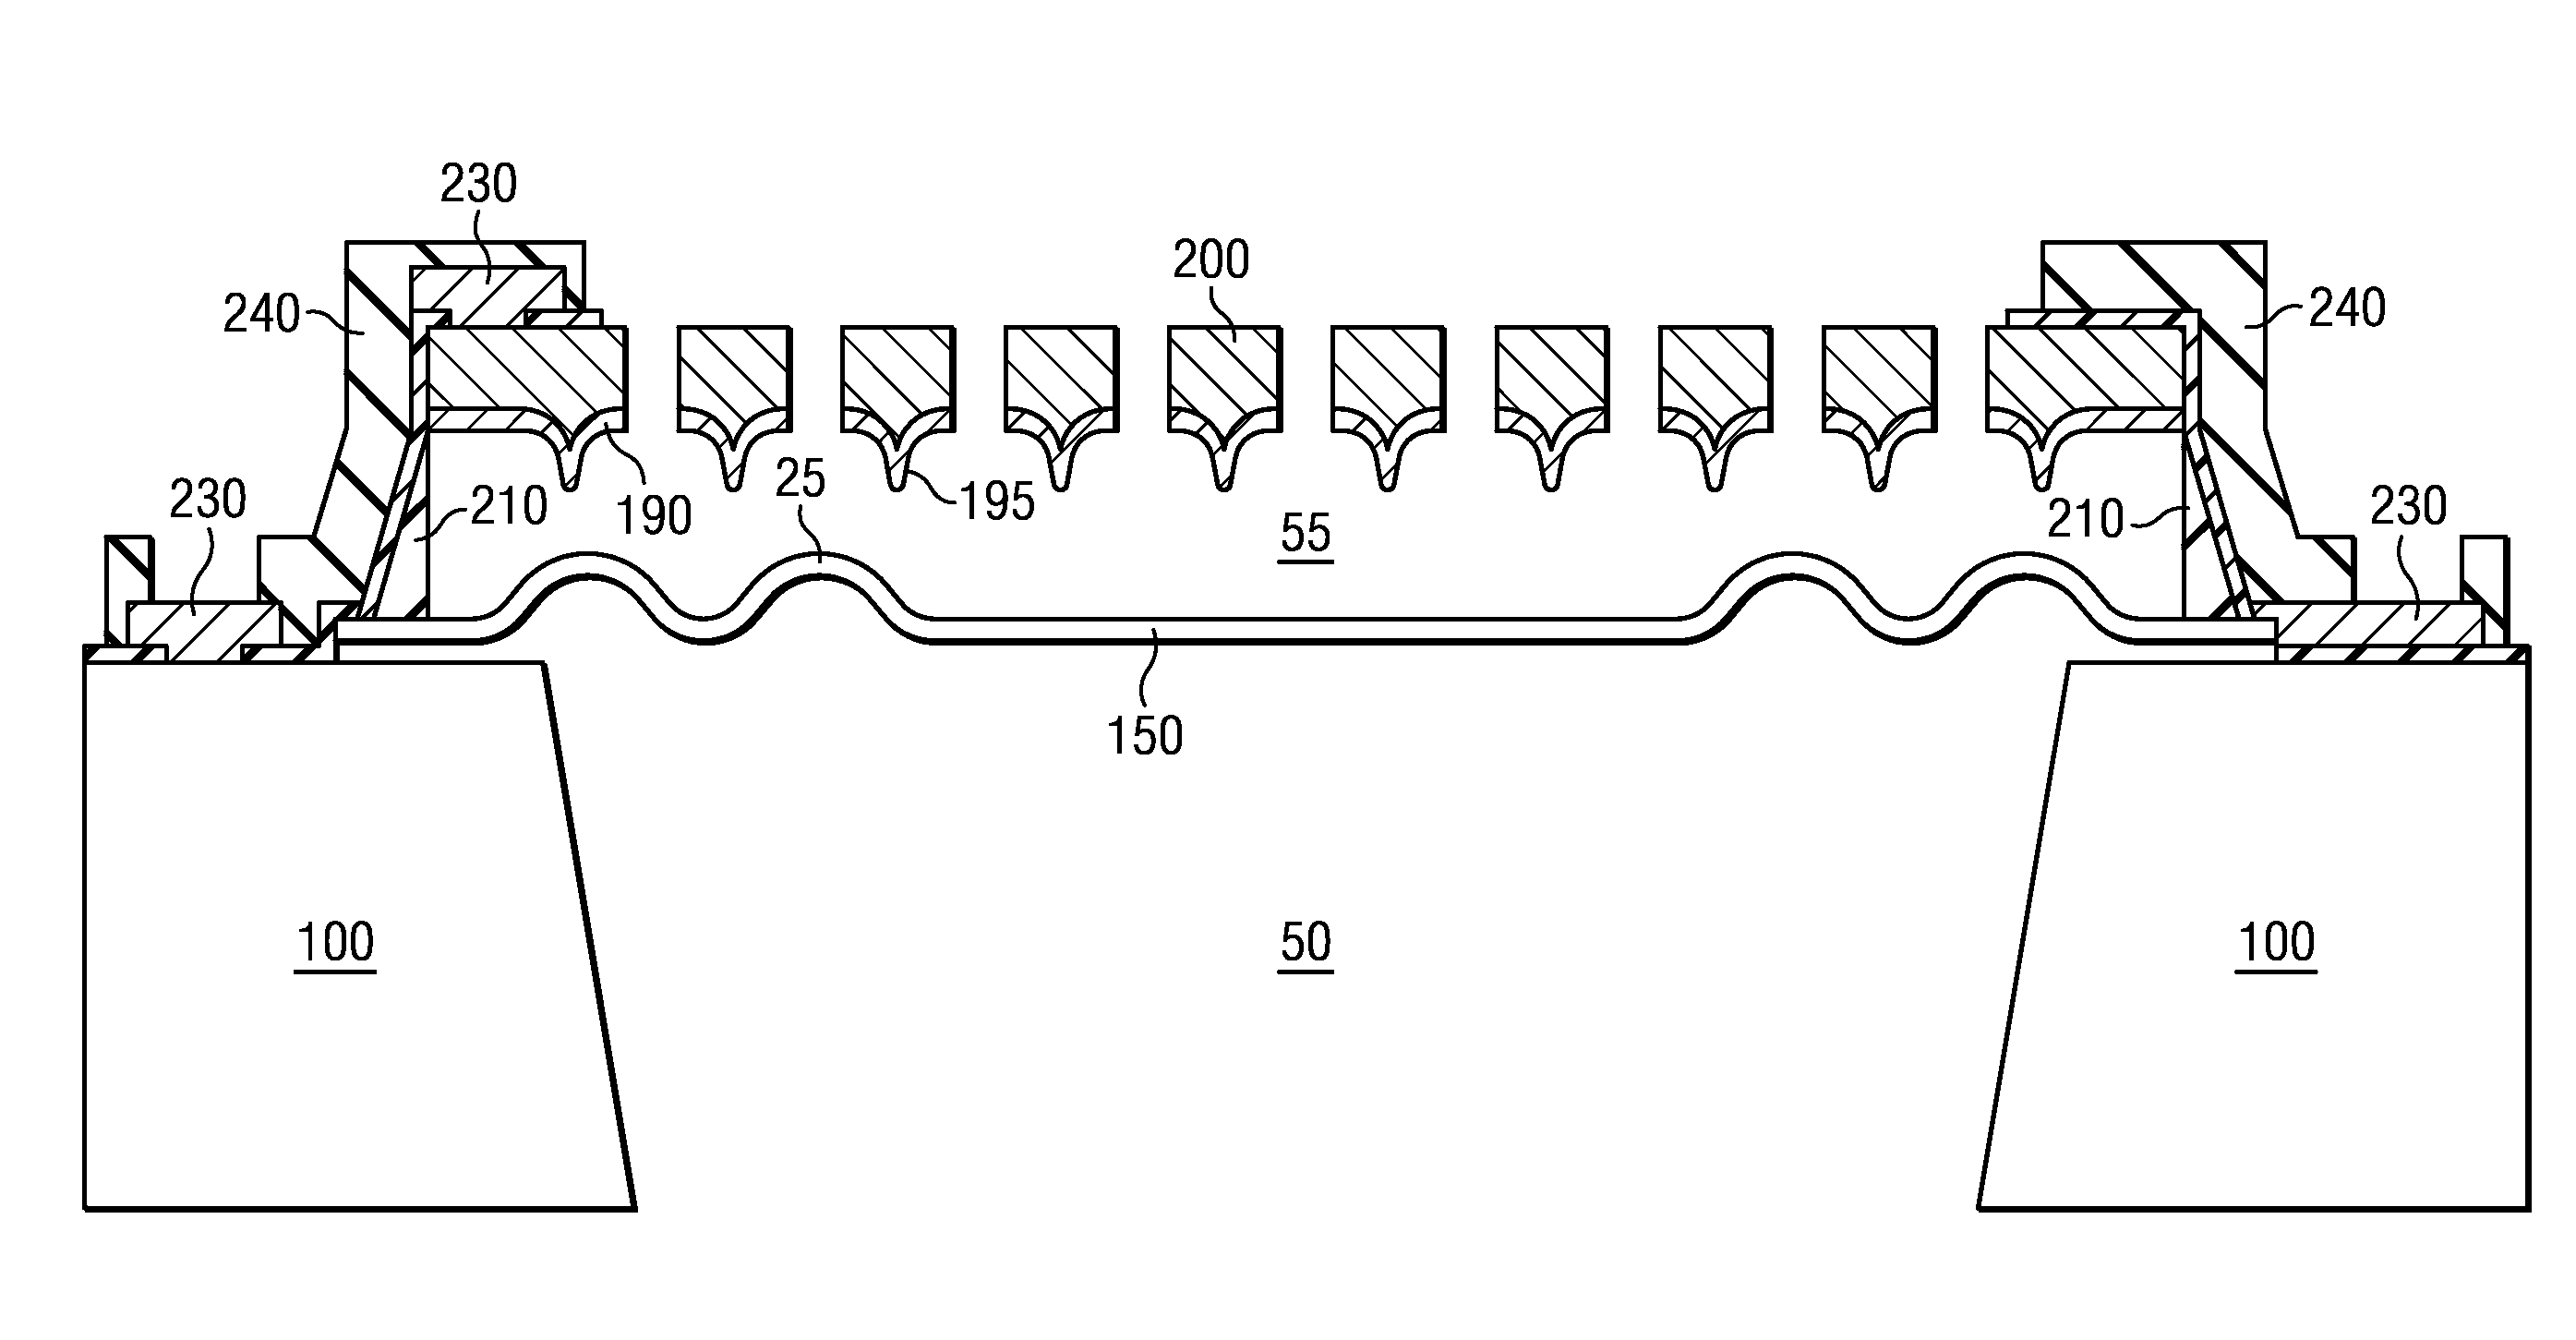 Semiconductor Devices and Methods of Fabrication Thereof